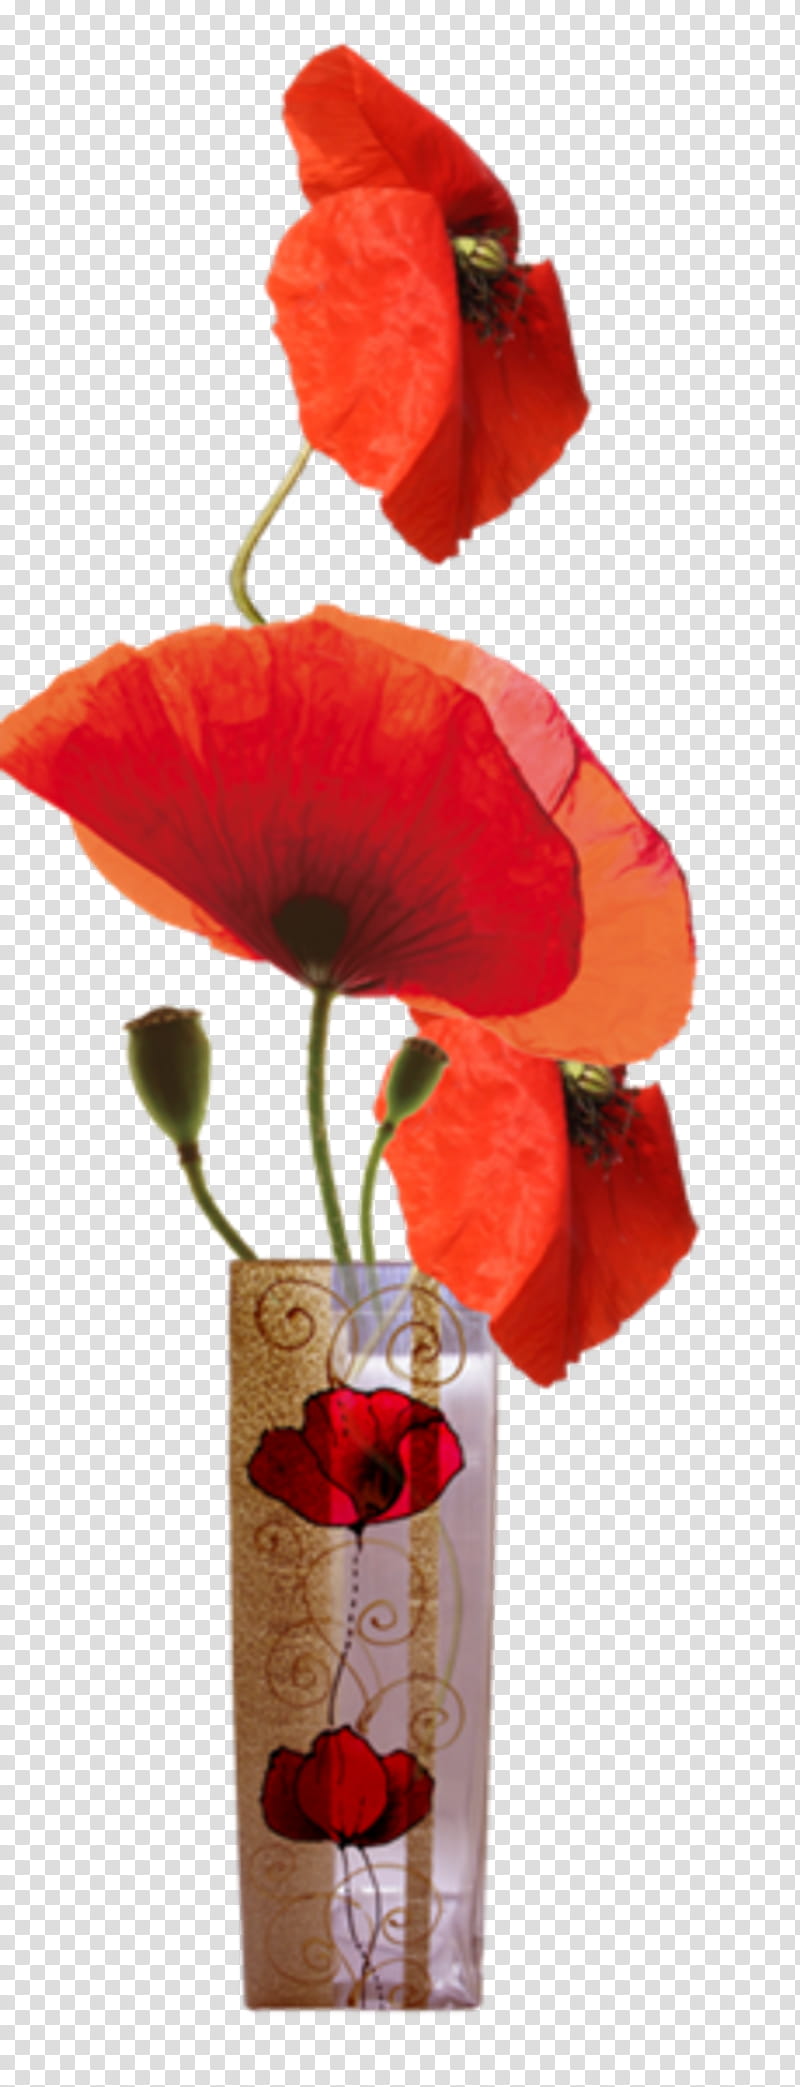 Red Watercolor Flowers, Common Poppy, Painting, Watercolor Painting, Opium Poppy, Vase, Drawing, Plants transparent background PNG clipart